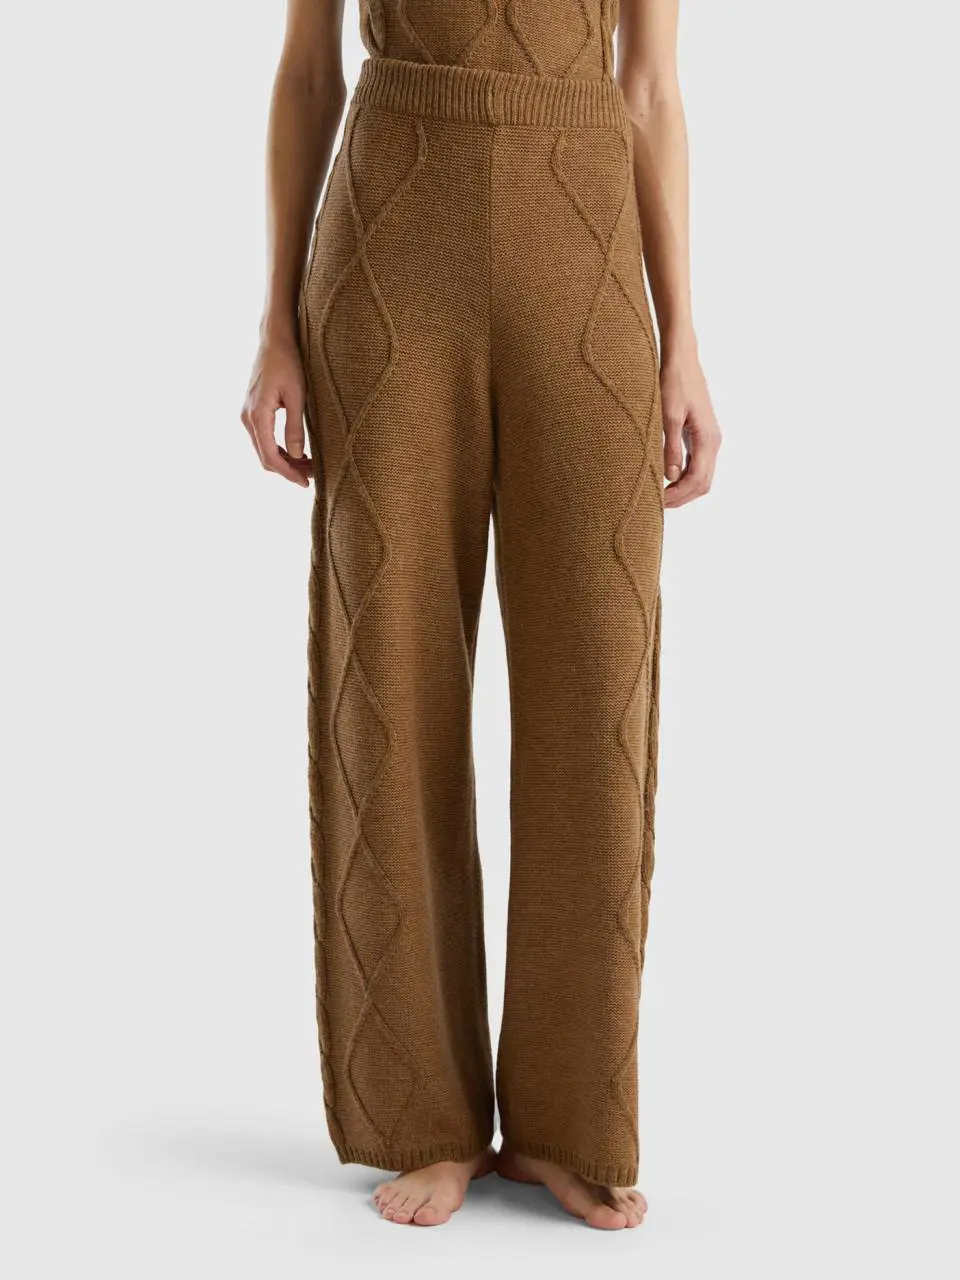 Benetton knit trousers with cables and diamonds. 1